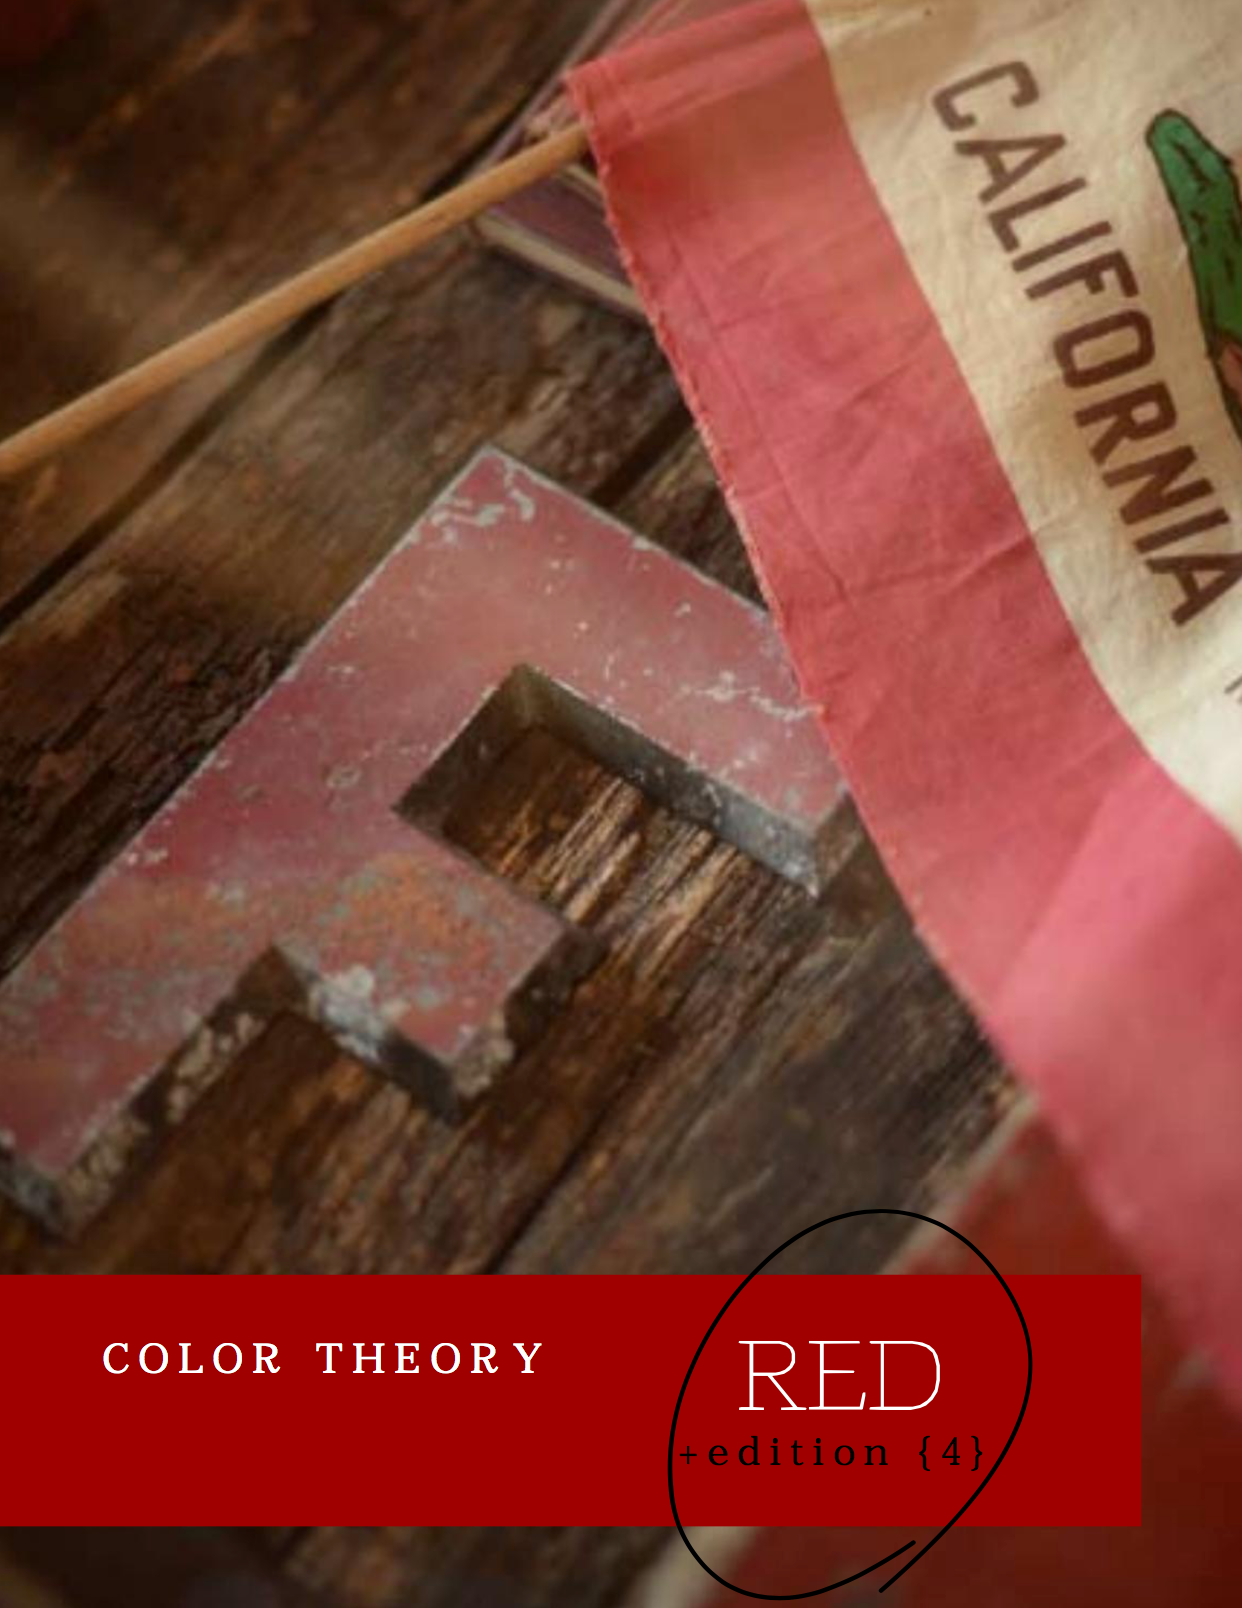 COLOR THEORY // RED